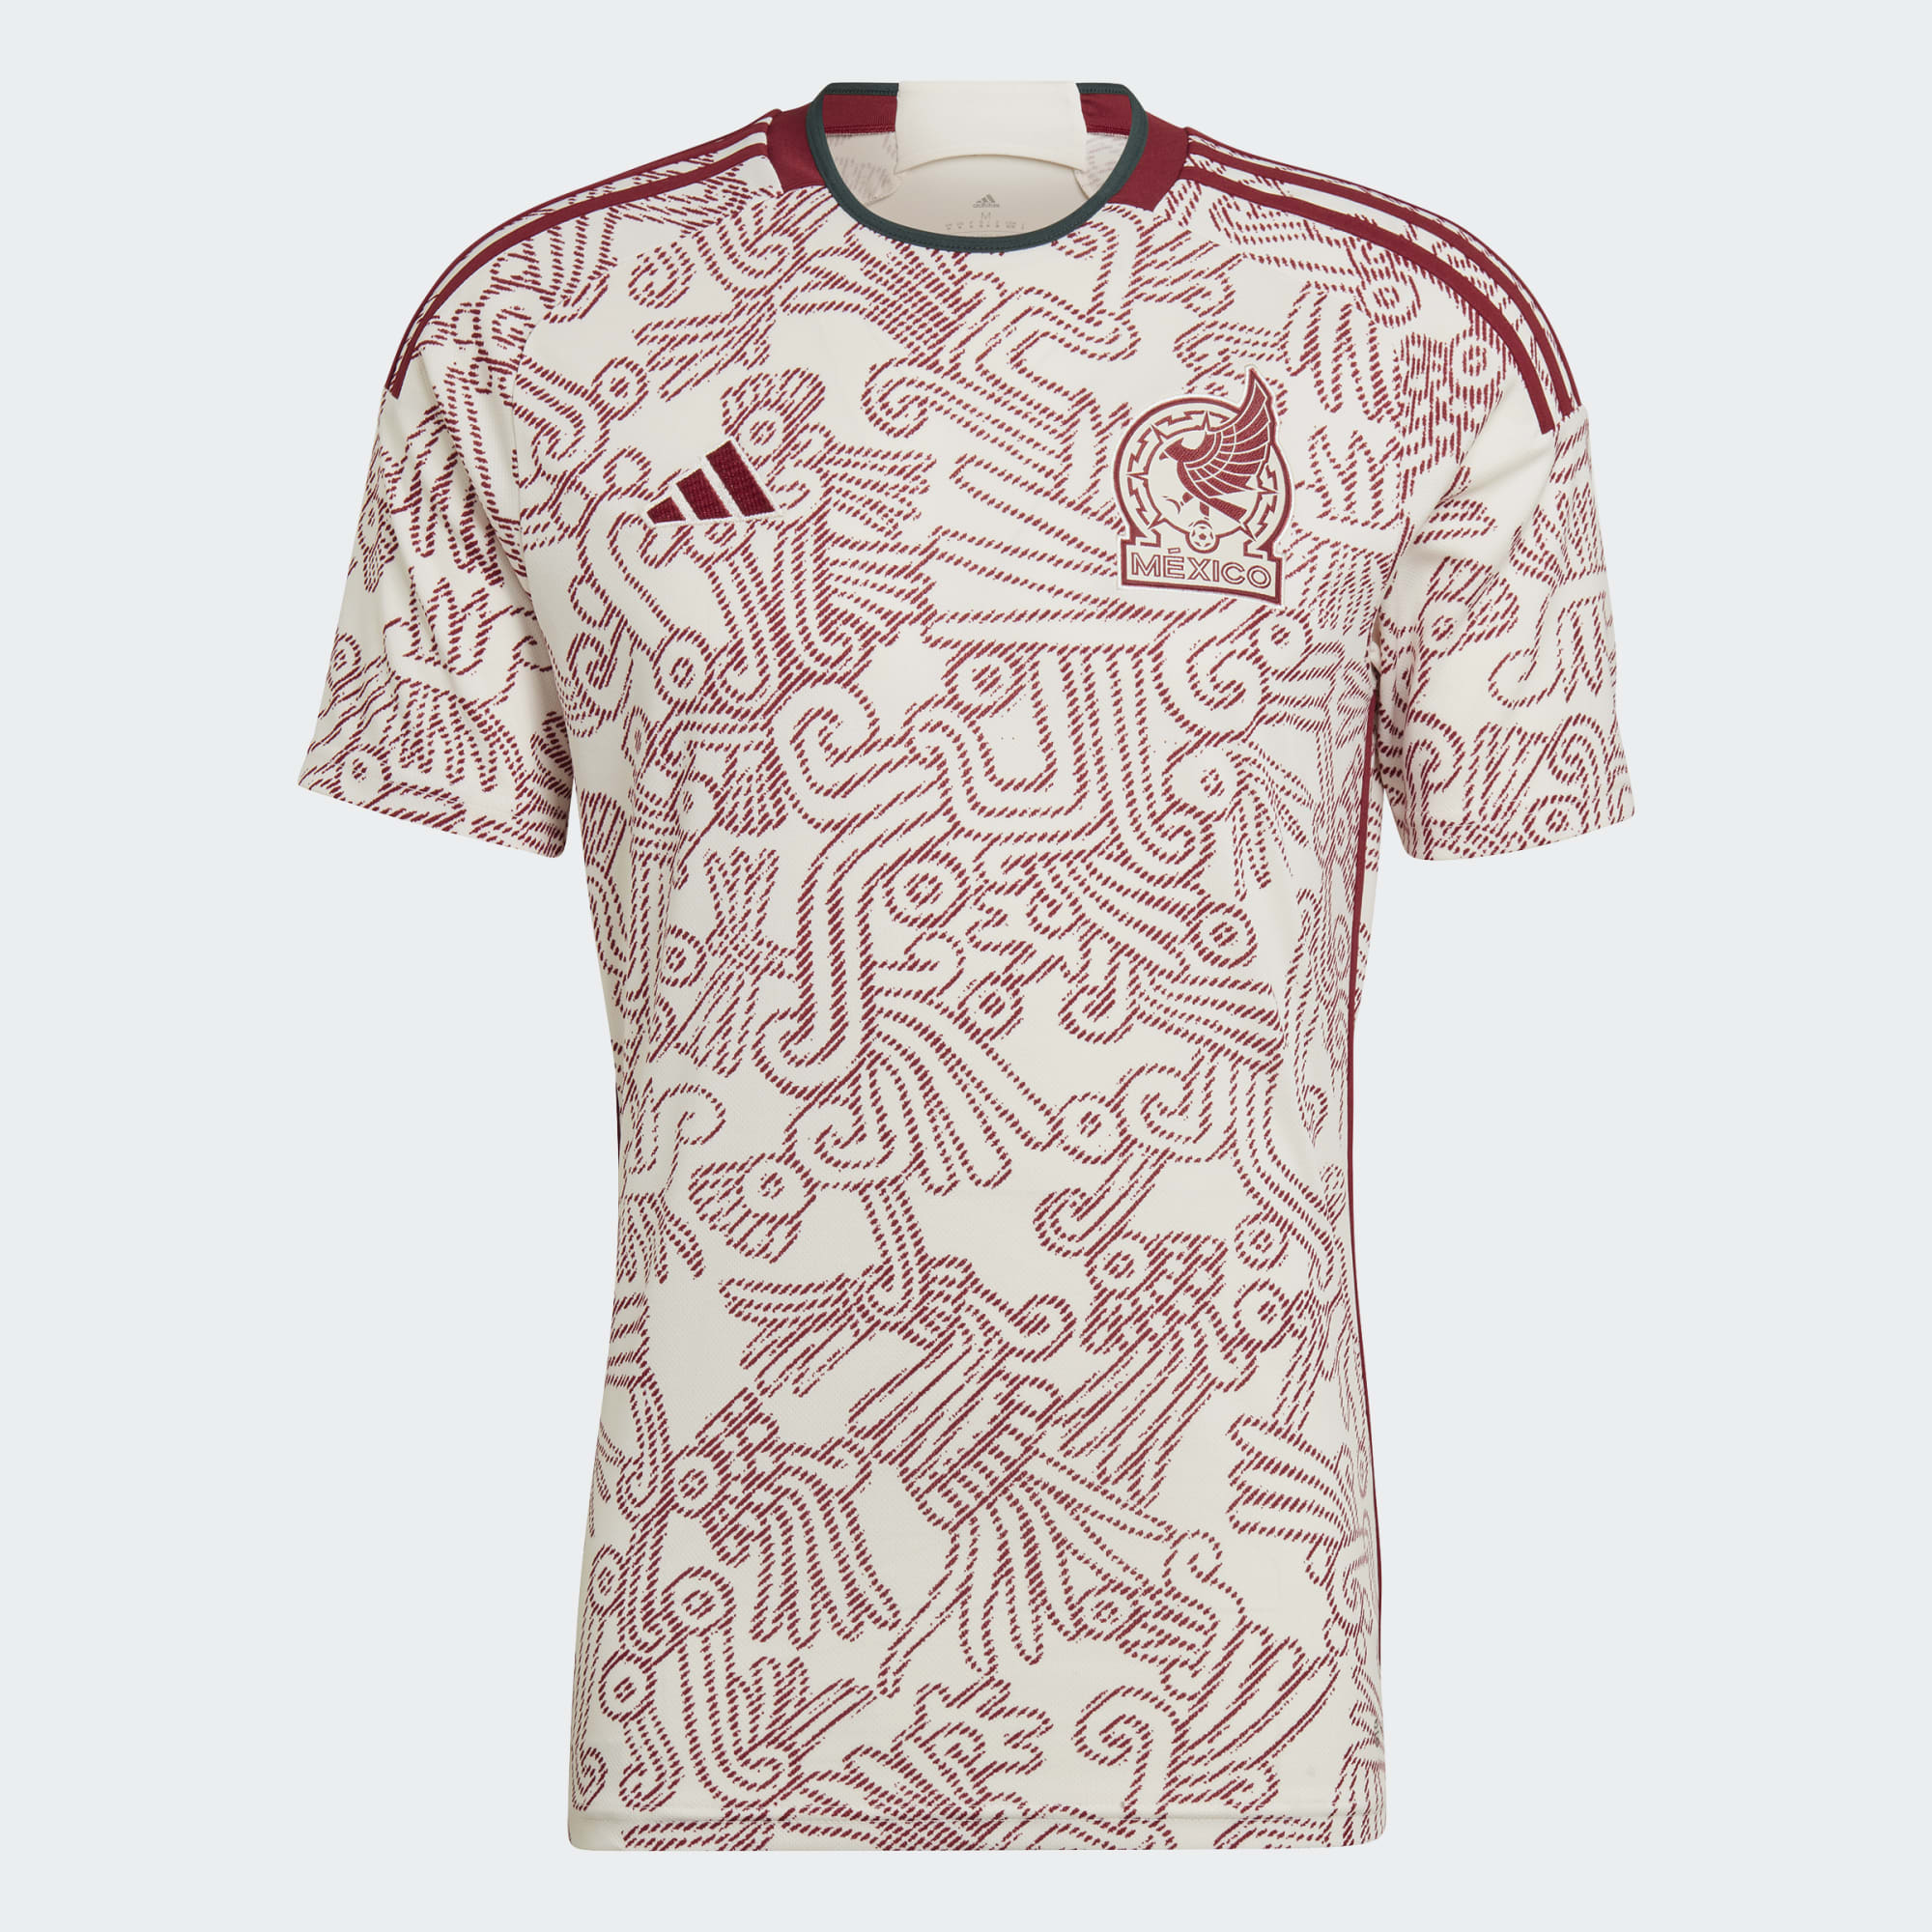 mexico soccer jersey in store